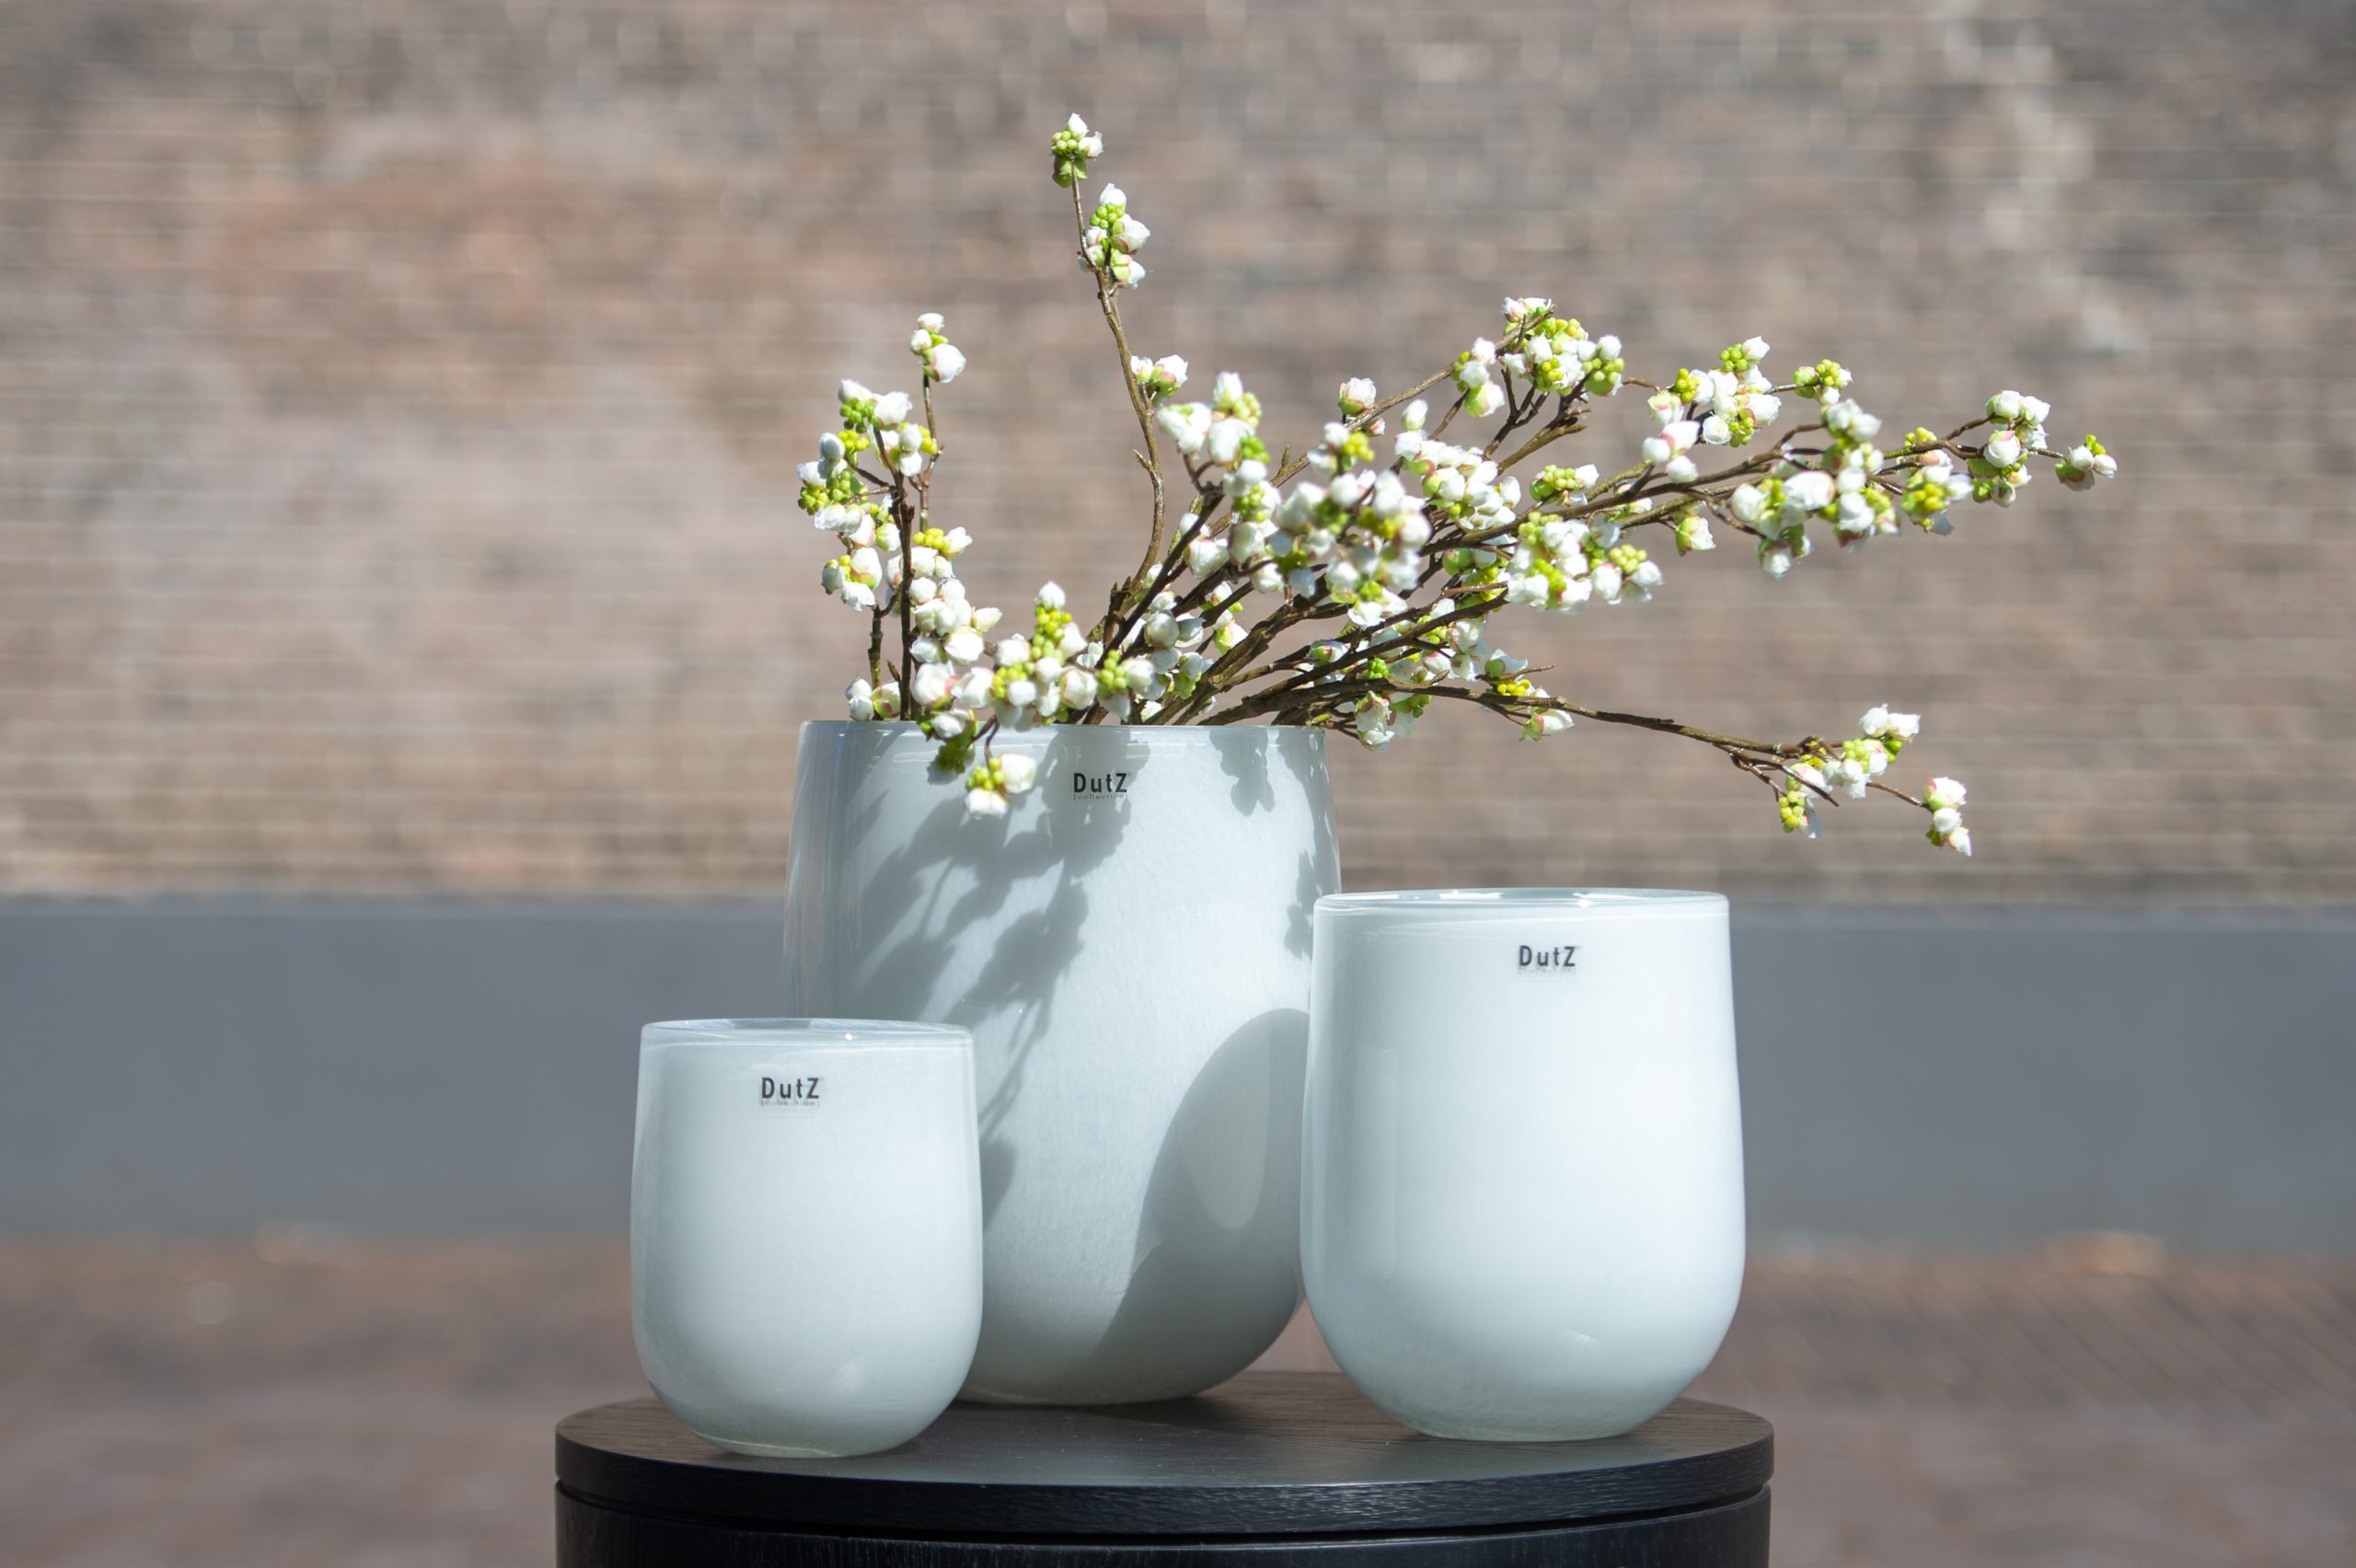 Three DutZ Collection white barrel vases. In the biggest one is a blossom branch. It stands on a round tabel